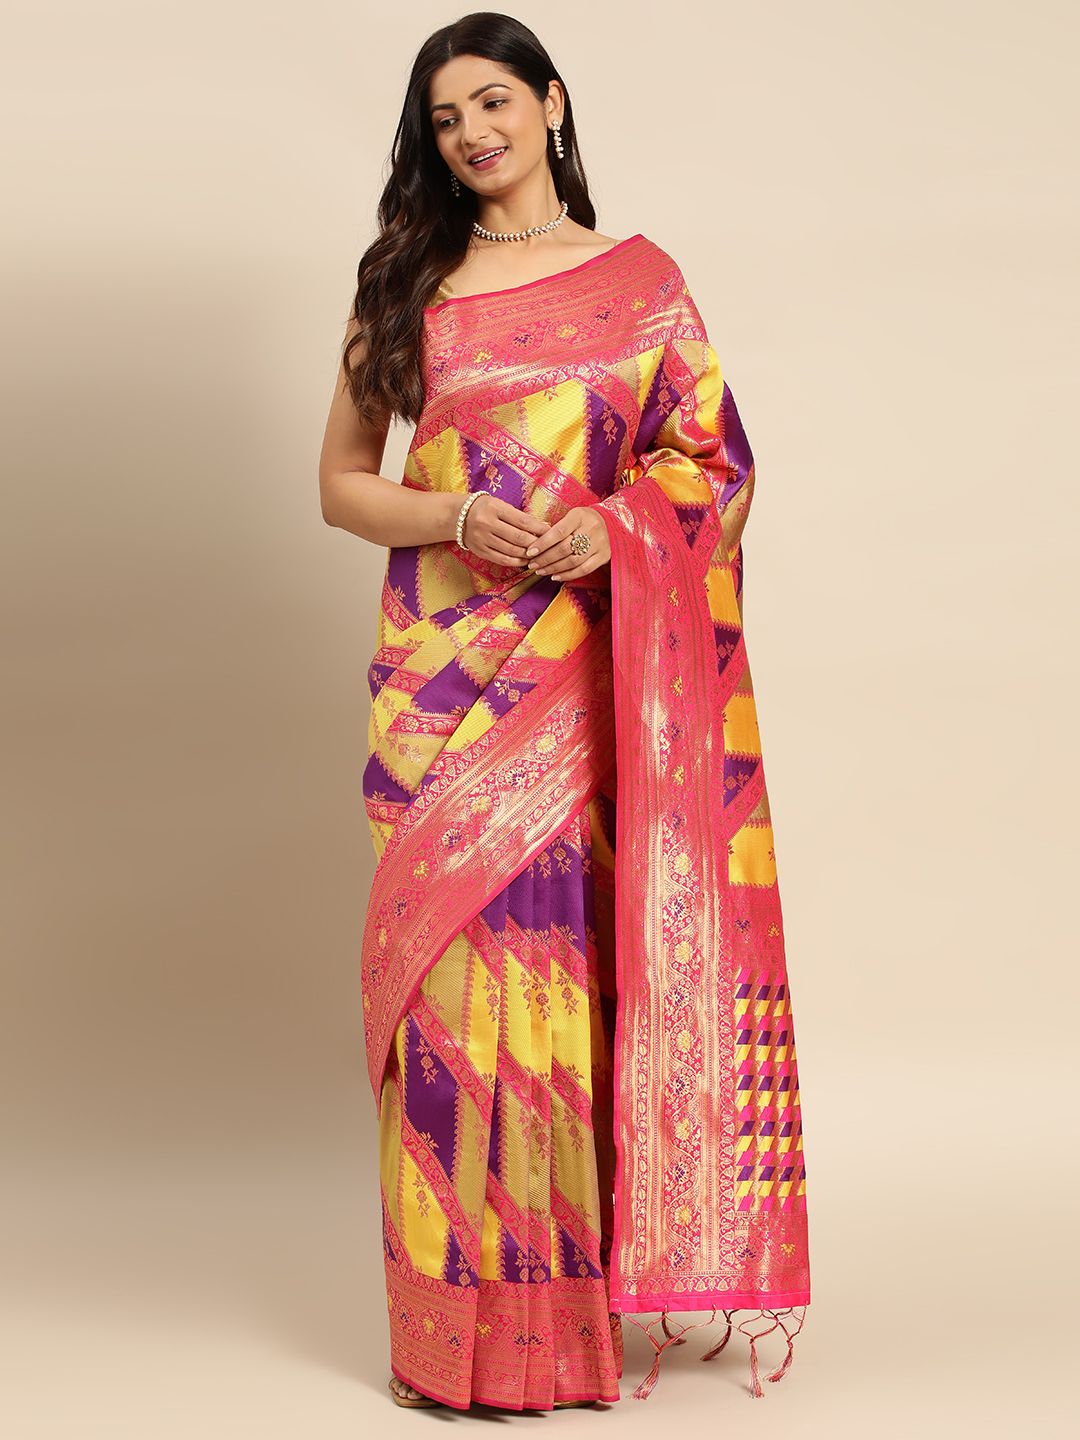 Pink Color Gorgeous Zari Border Silk Saree Perfect Blend of Tradition and Glamour